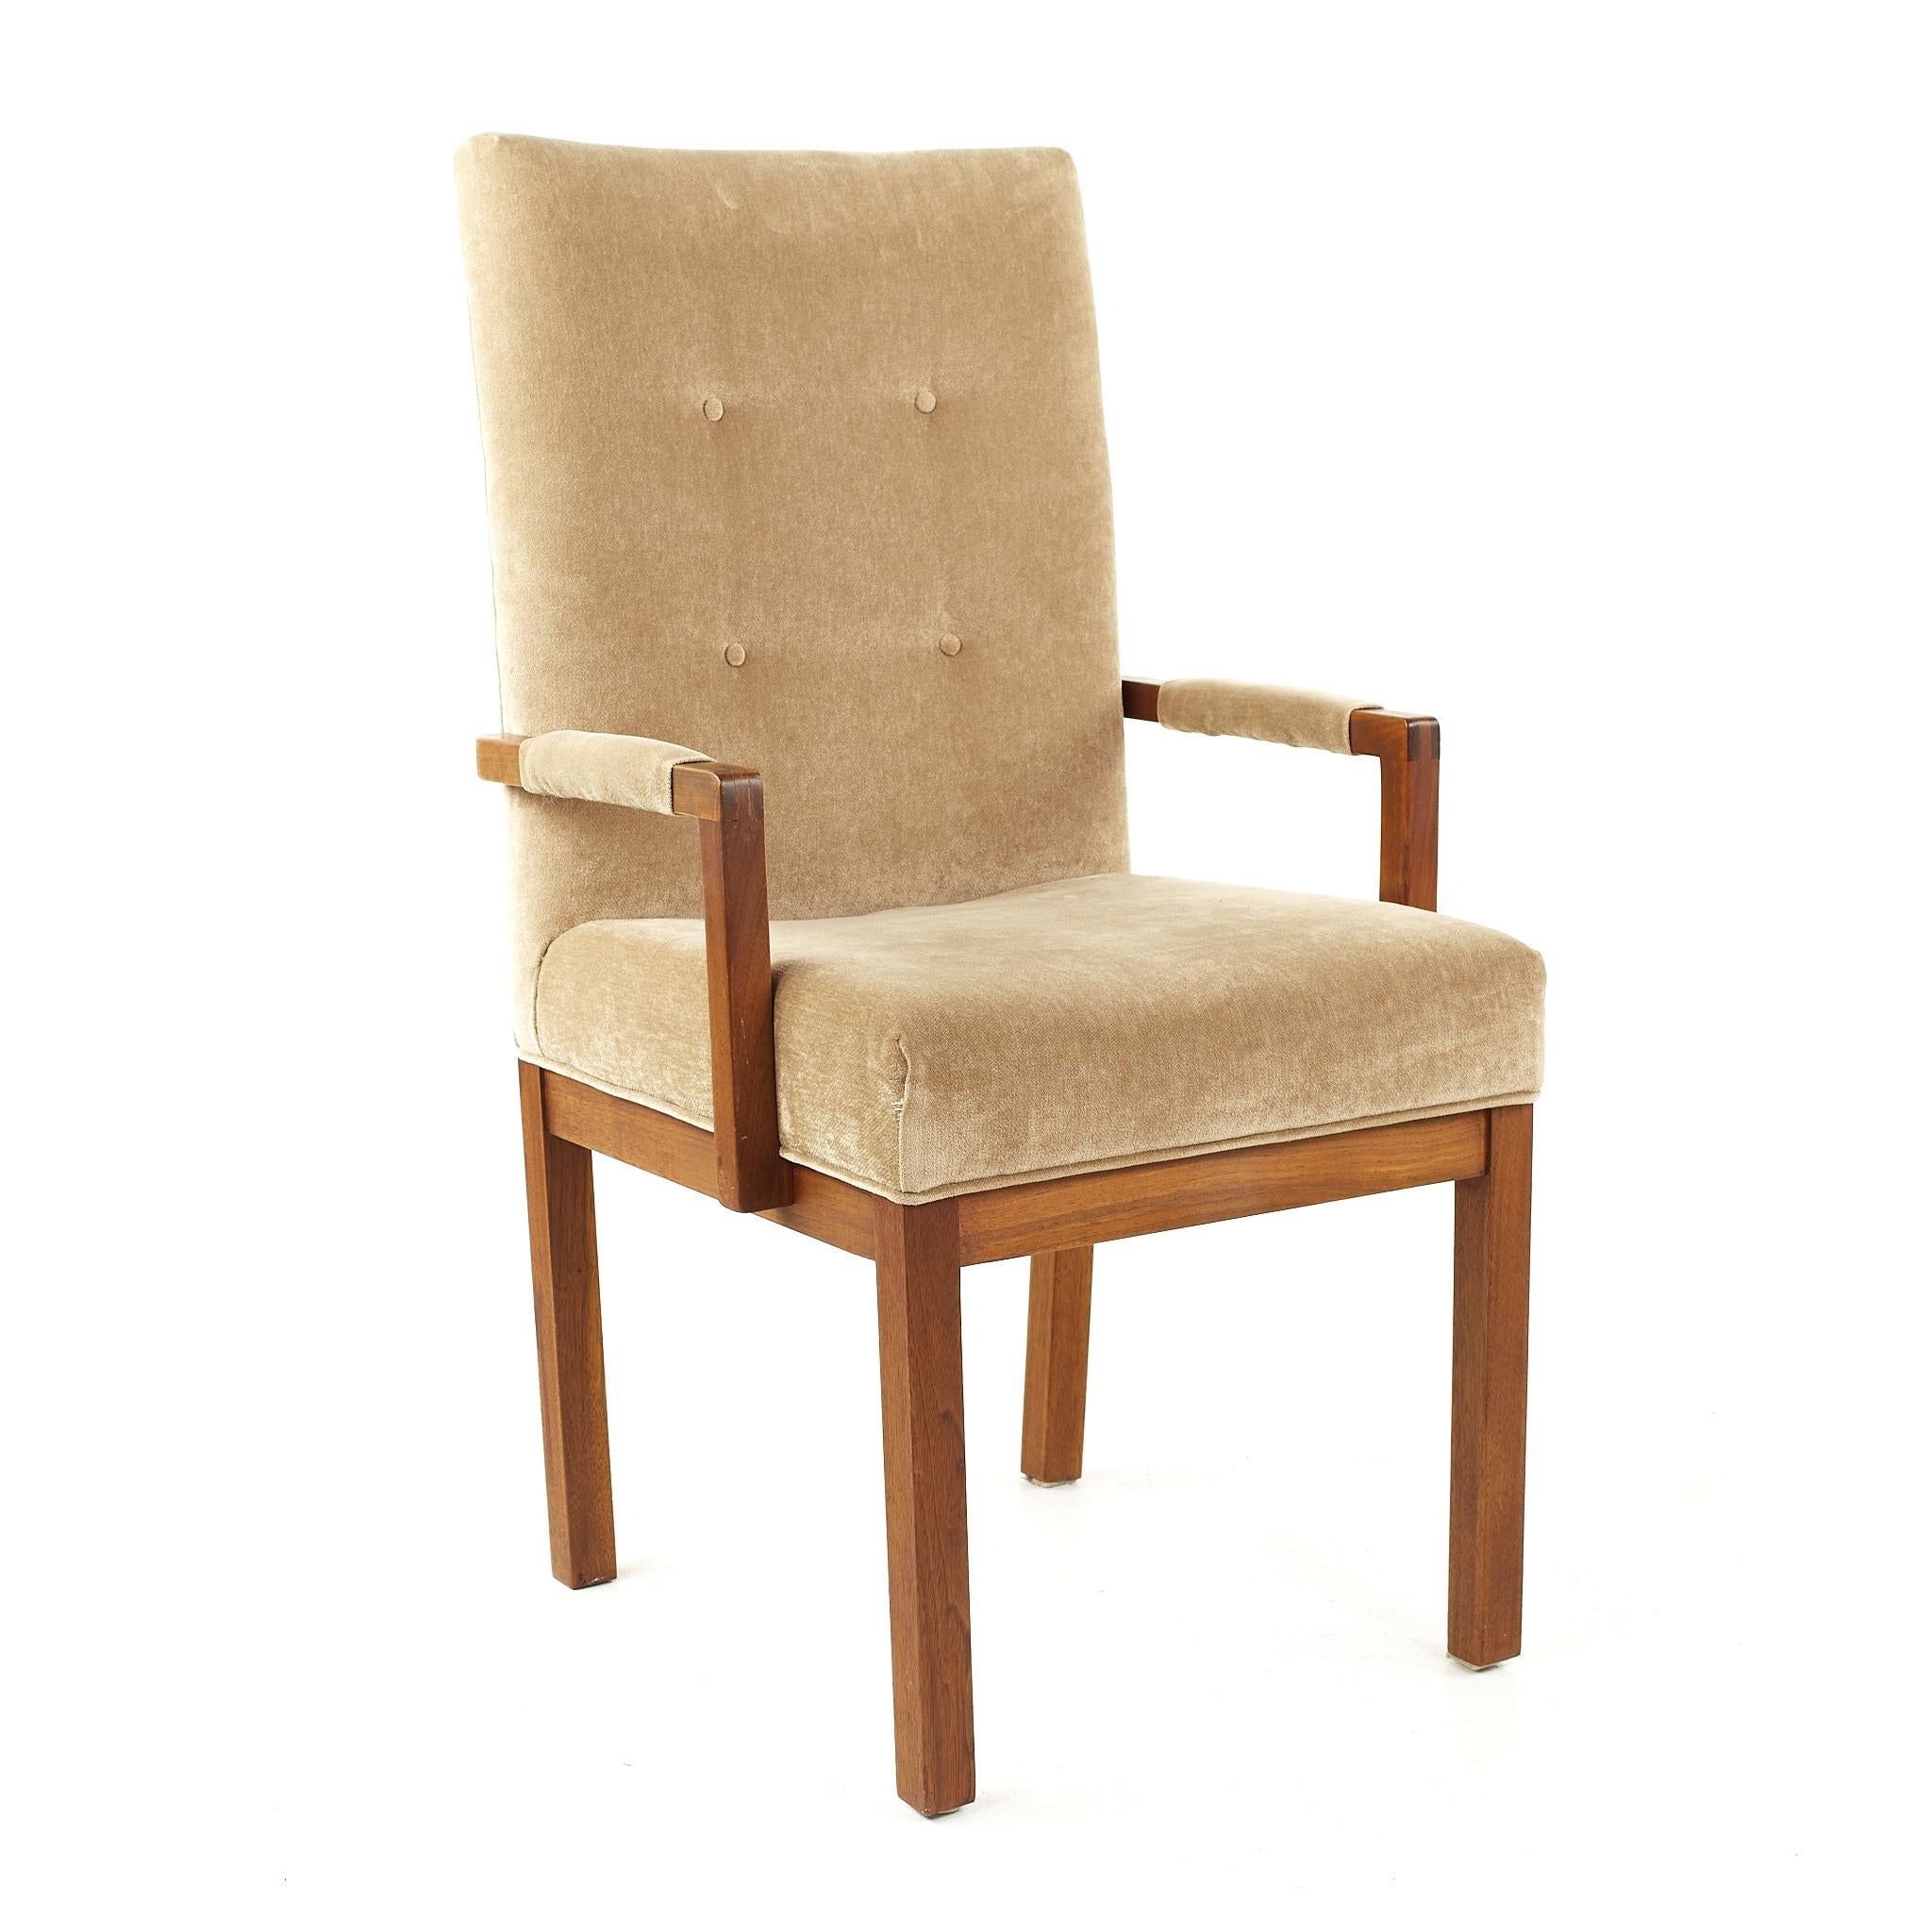 Upholstery Dillingham Mid Century Walnut Tufted Dining Chairs, Set of 4 For Sale